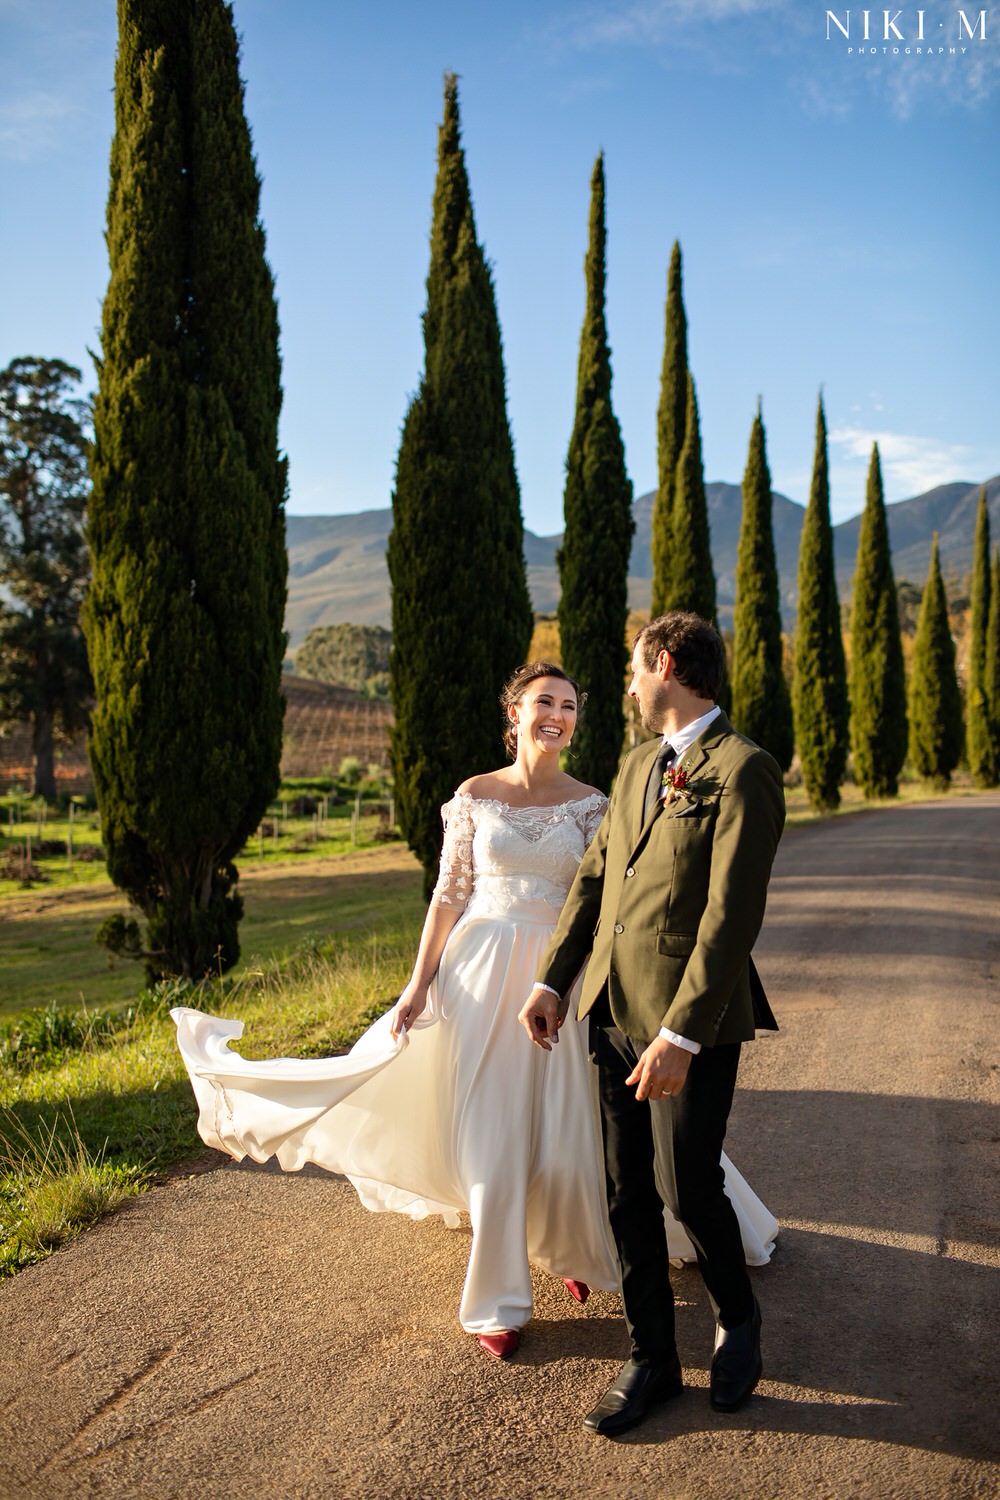 Cypress trees and the bridal couple after their ceremony at Paul Cluver Wine's chapel for their Elgin wedding. The bride wears a beautiful dress by Fender Bridal Design and red shoes.